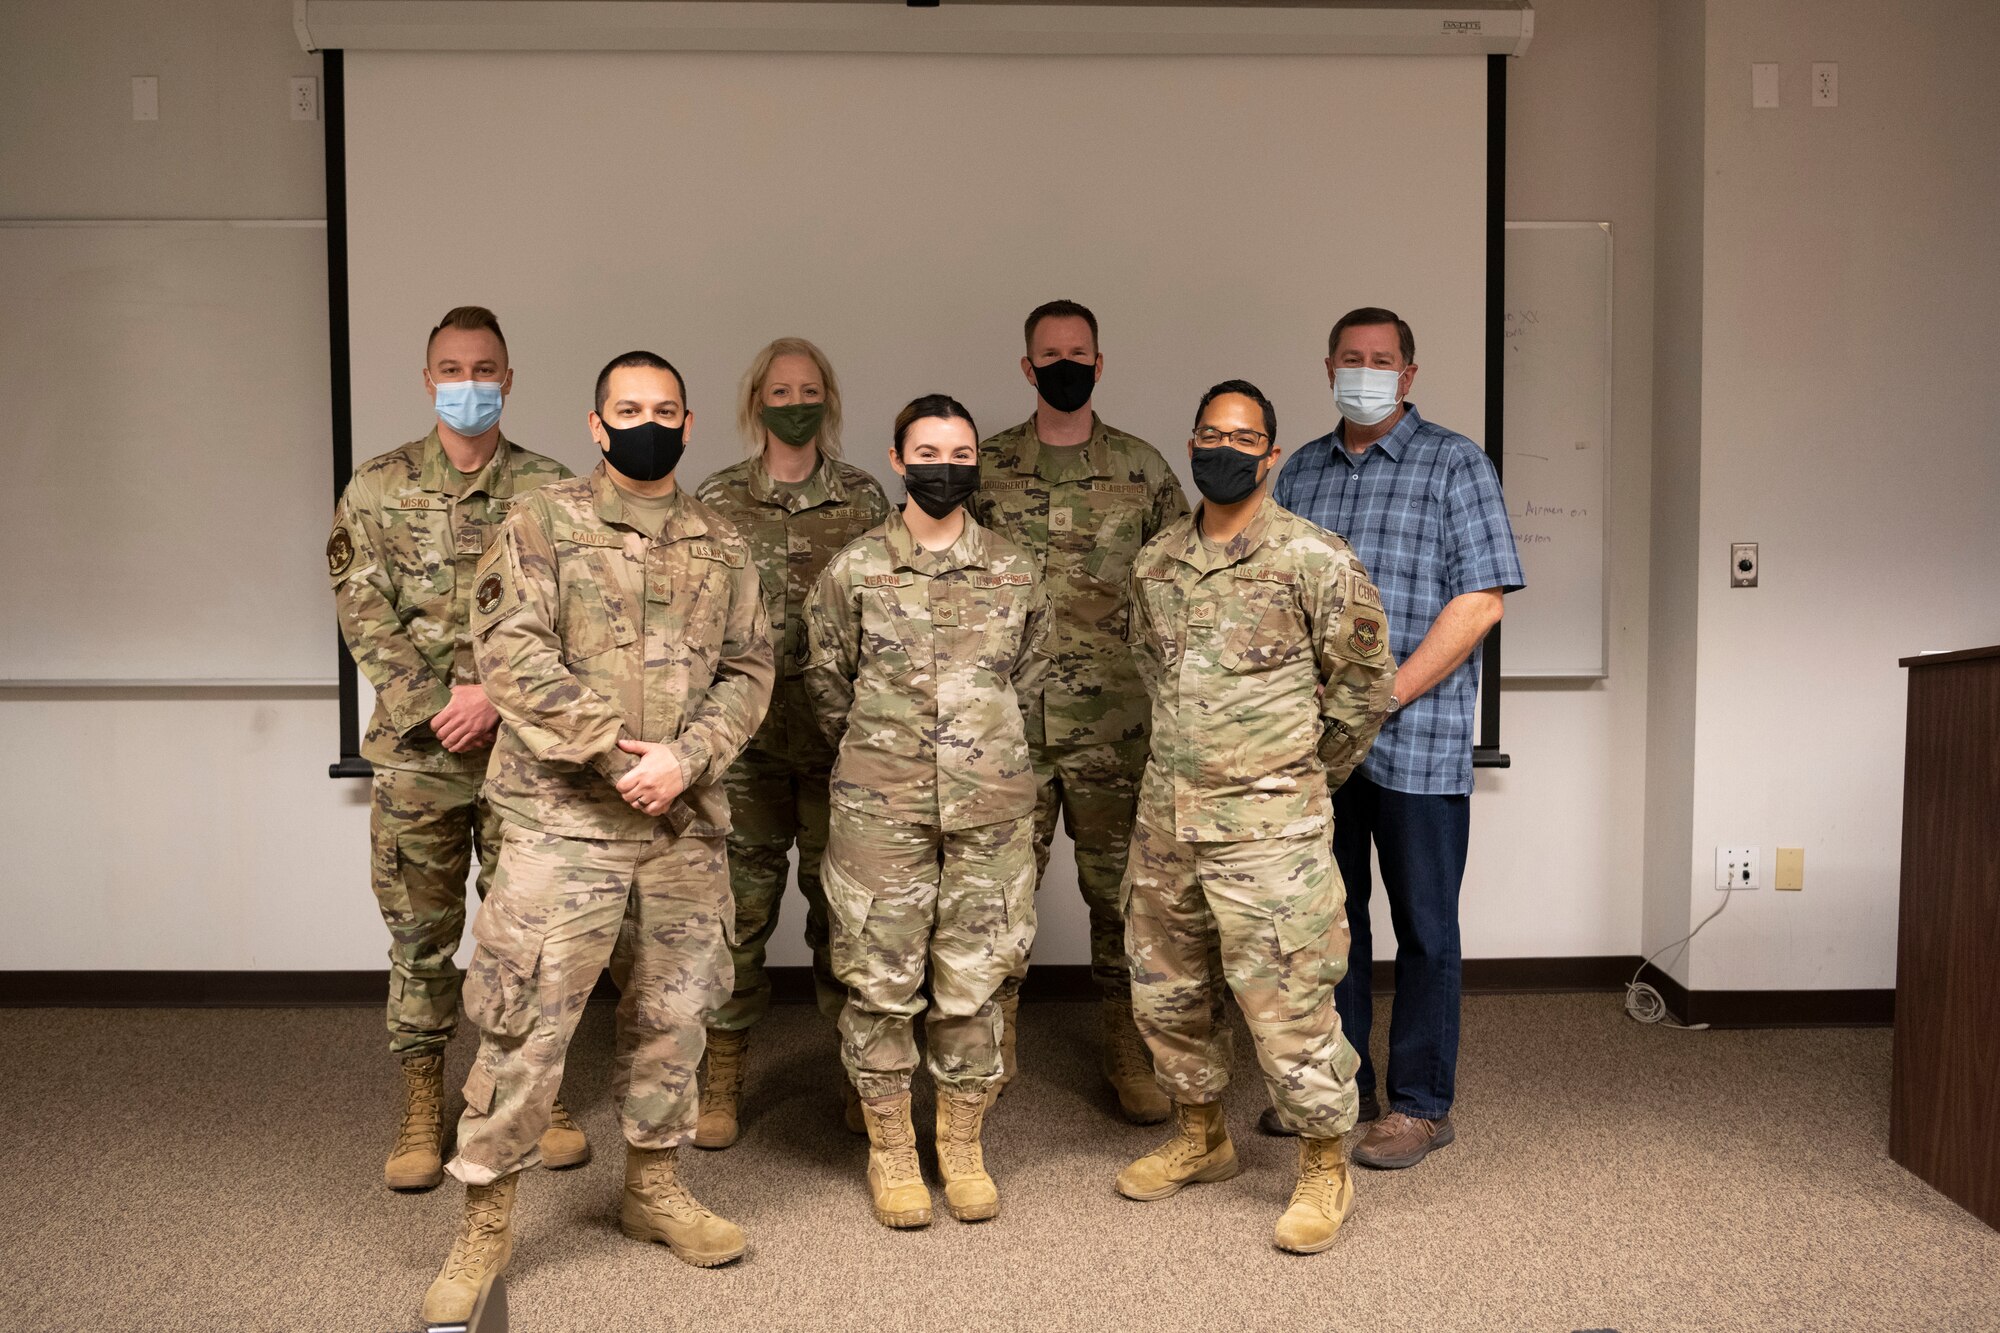 Airmen assigned to Travis Air Force Base, California, and Kirk Whitman, installation violence prevention integrator, pose for photo during Leadership Rounds at Travis AFB, California, March 12, 2021. Col. Corey Simmons, 60th Air Mobility Wing commander, presented seven individuals with letters of appreciation for their participation in showcasing Team Travis’ new suicide and prevention virtual reality training. (U.S. Air Force photo by Airman 1st Class Alexander Merchak)